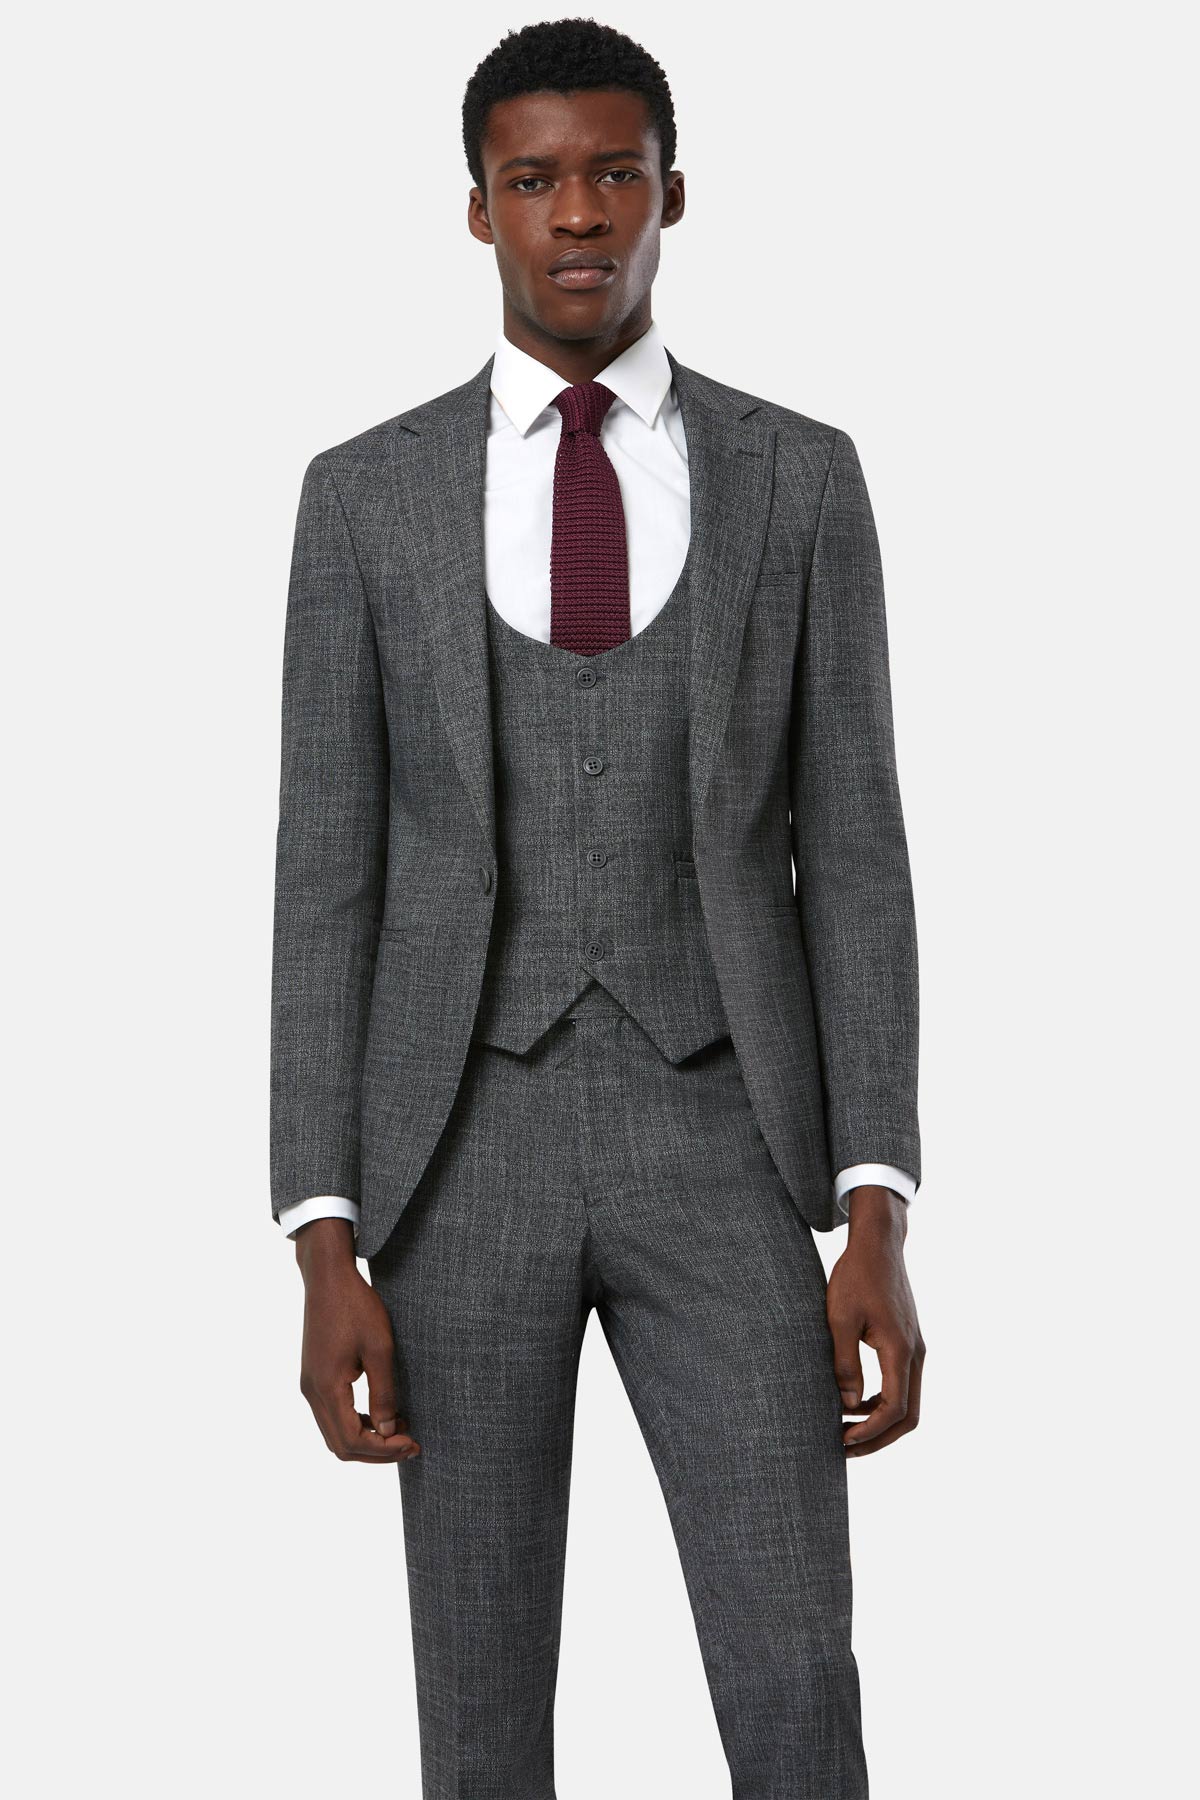 Harry Grey 3 Piece Suit - Tom Murphy's Formal and Menswear